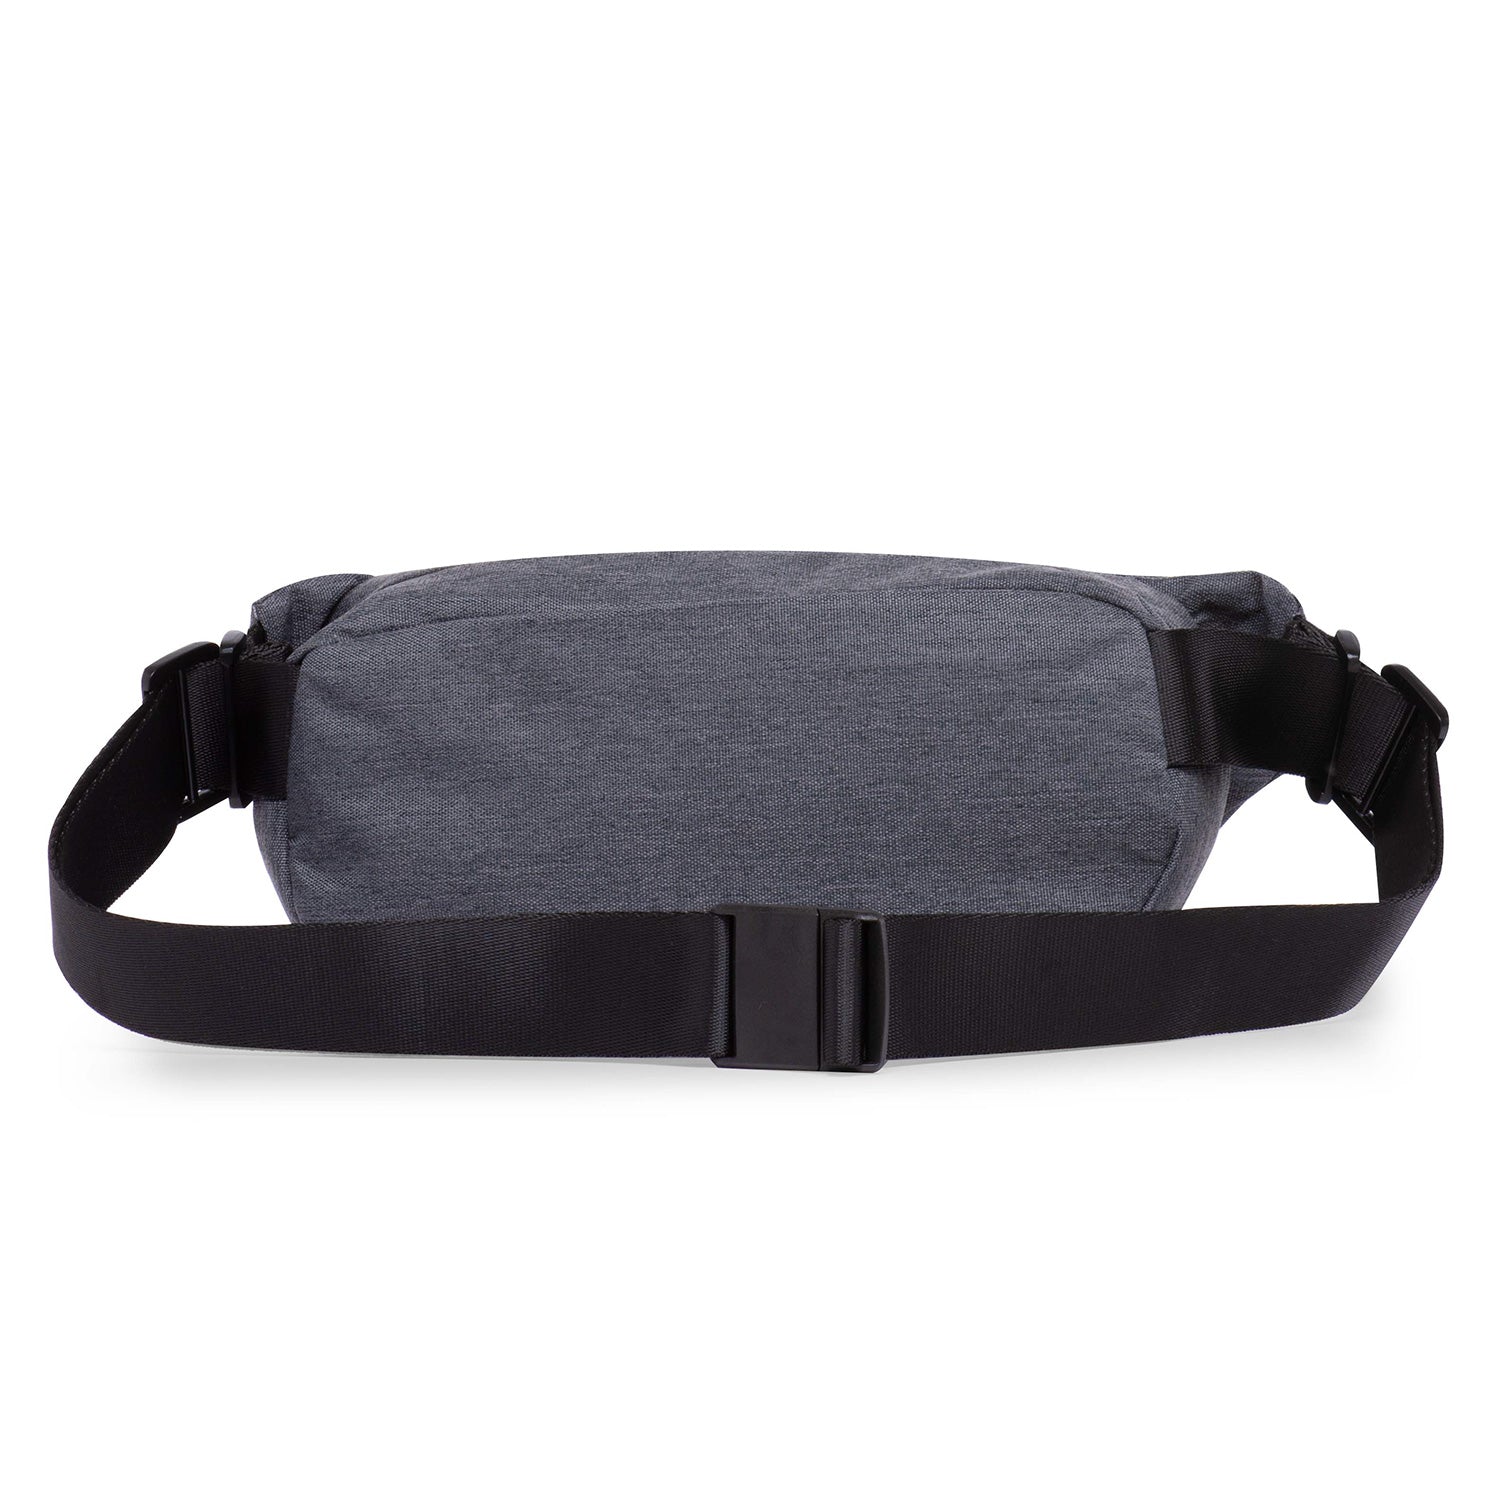 The Everyday Sling